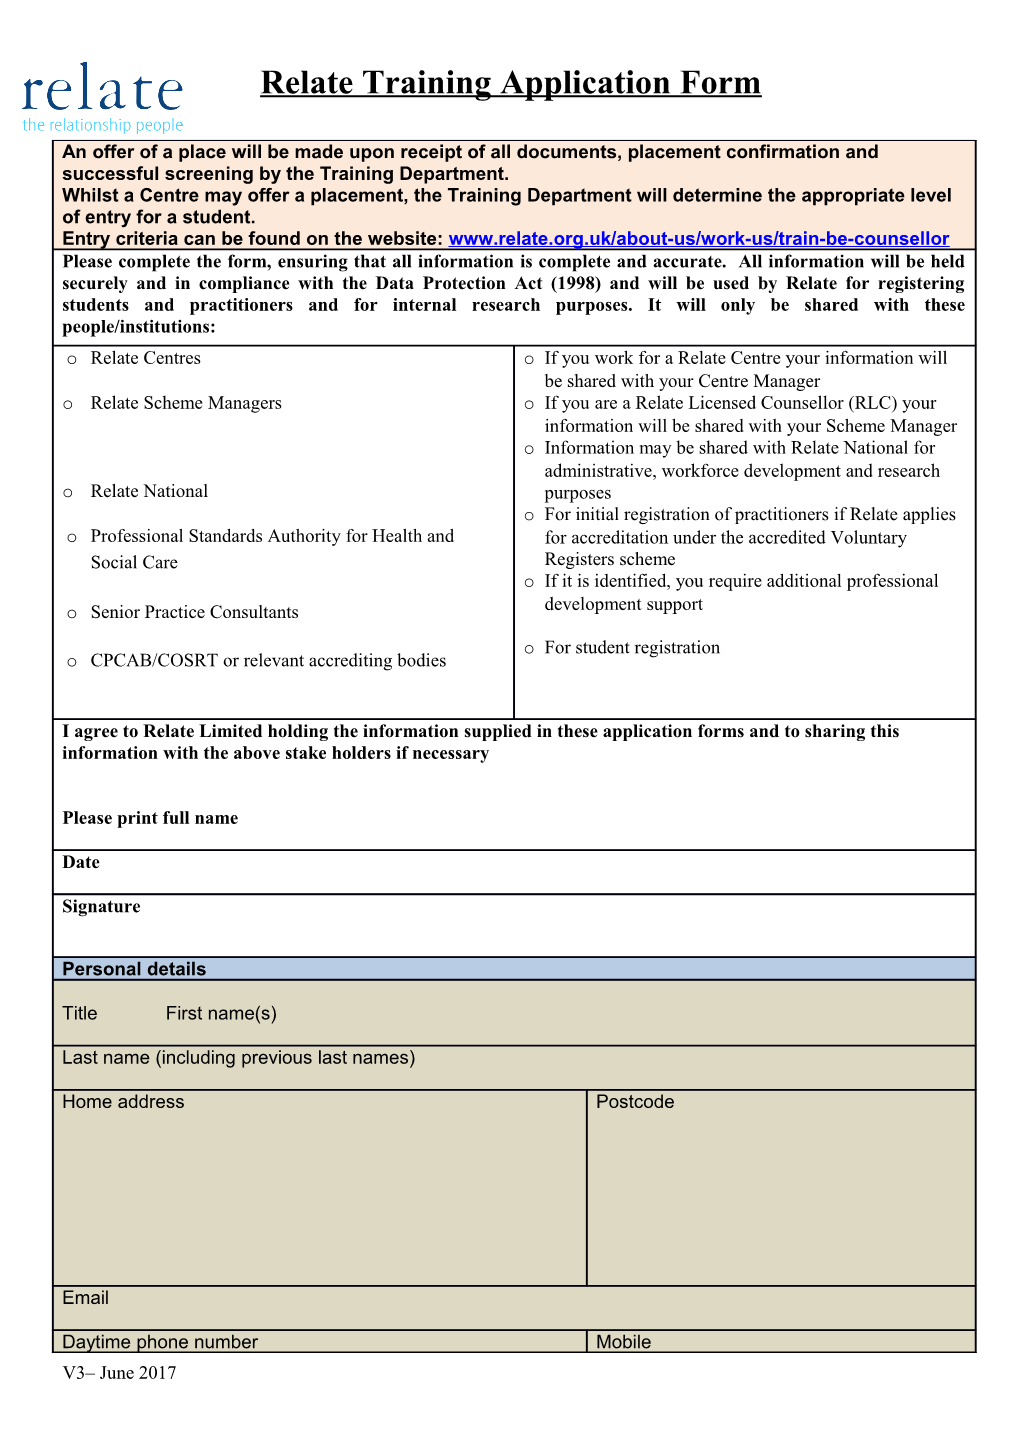 Relate Training Application Form